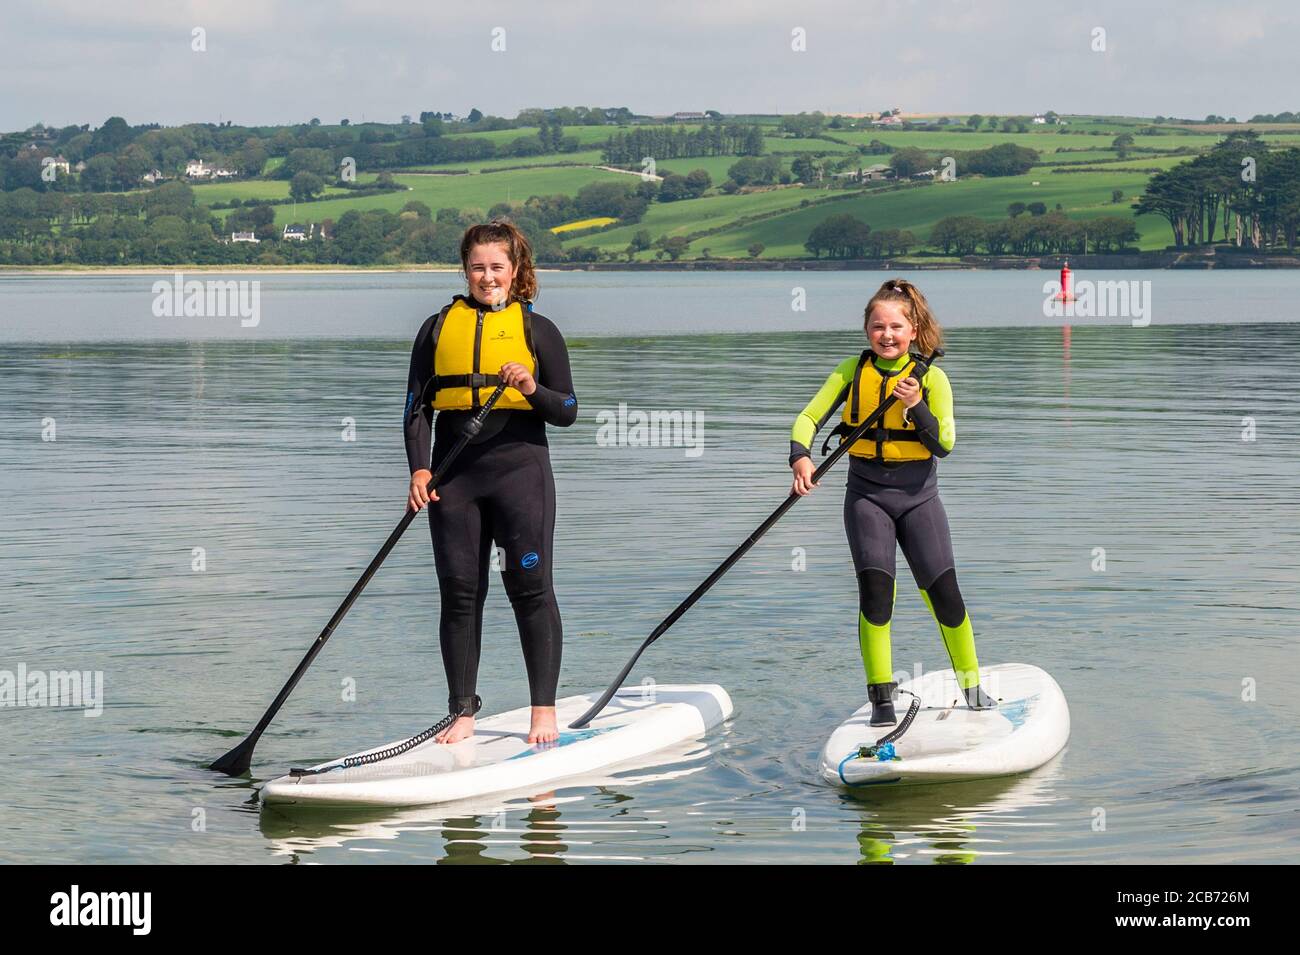 Courtmacsherry, West Cork, Ireland. 11th July, 2020. On yet another day of very warm sunshine, many people headed to the beach. Doing a spot of paddle boarding were Aoibheann and Caoimhe Byrne on holiday from Co. Cavan. Credit: AG News/Alamy Live News Stock Photo